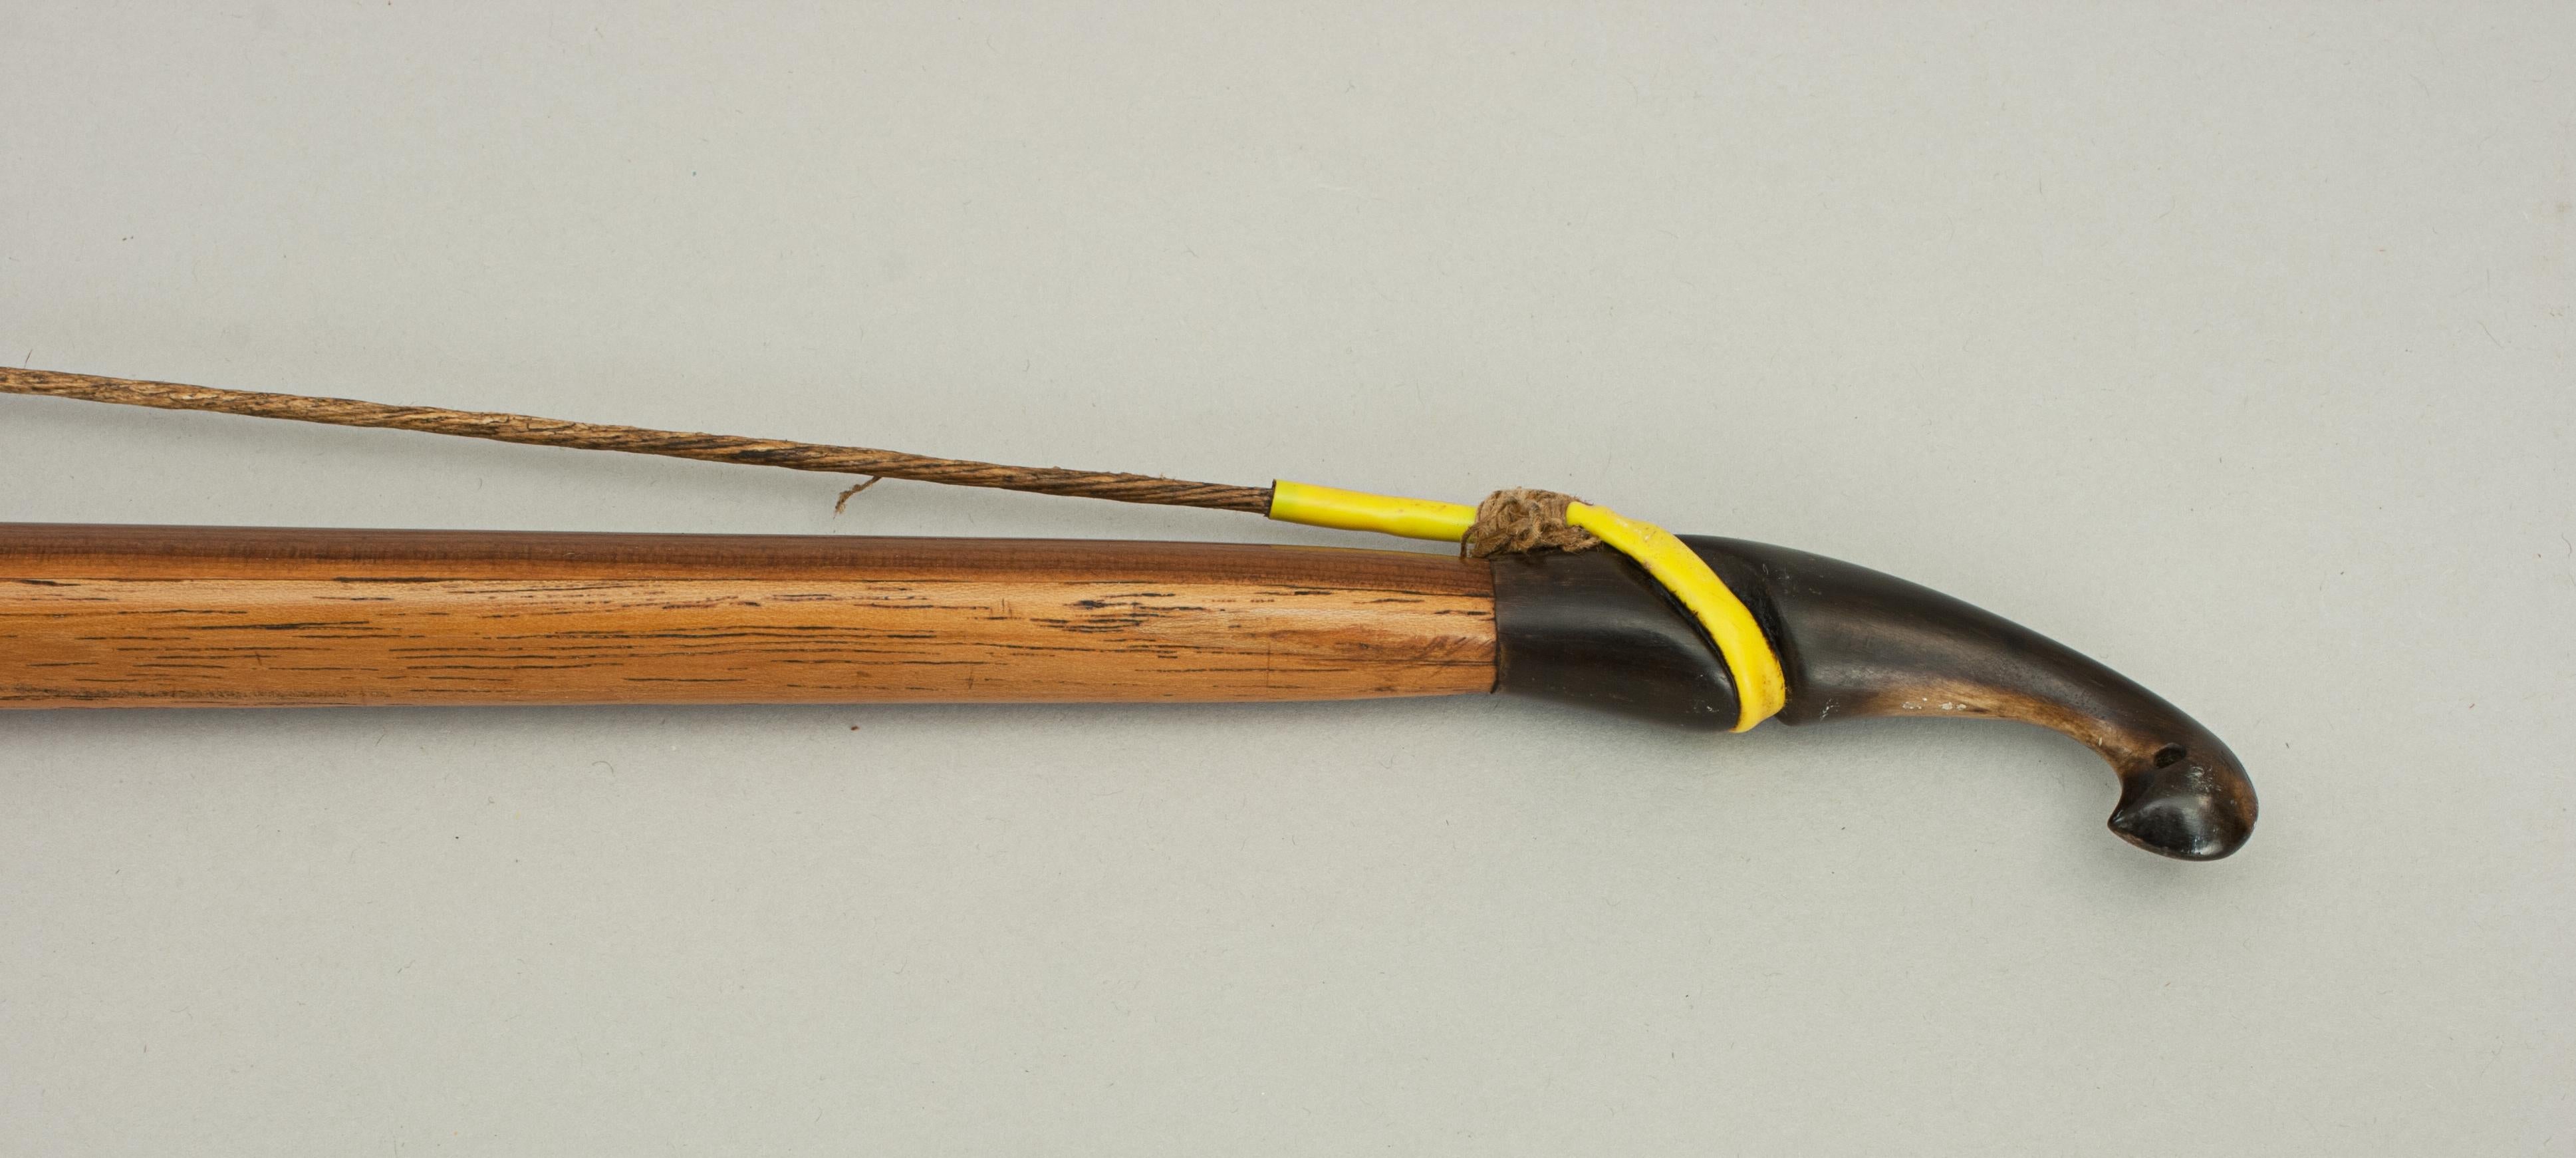 Sporting Art Vintage Yew-Wood Long Bow by Bown, Leamington Spa